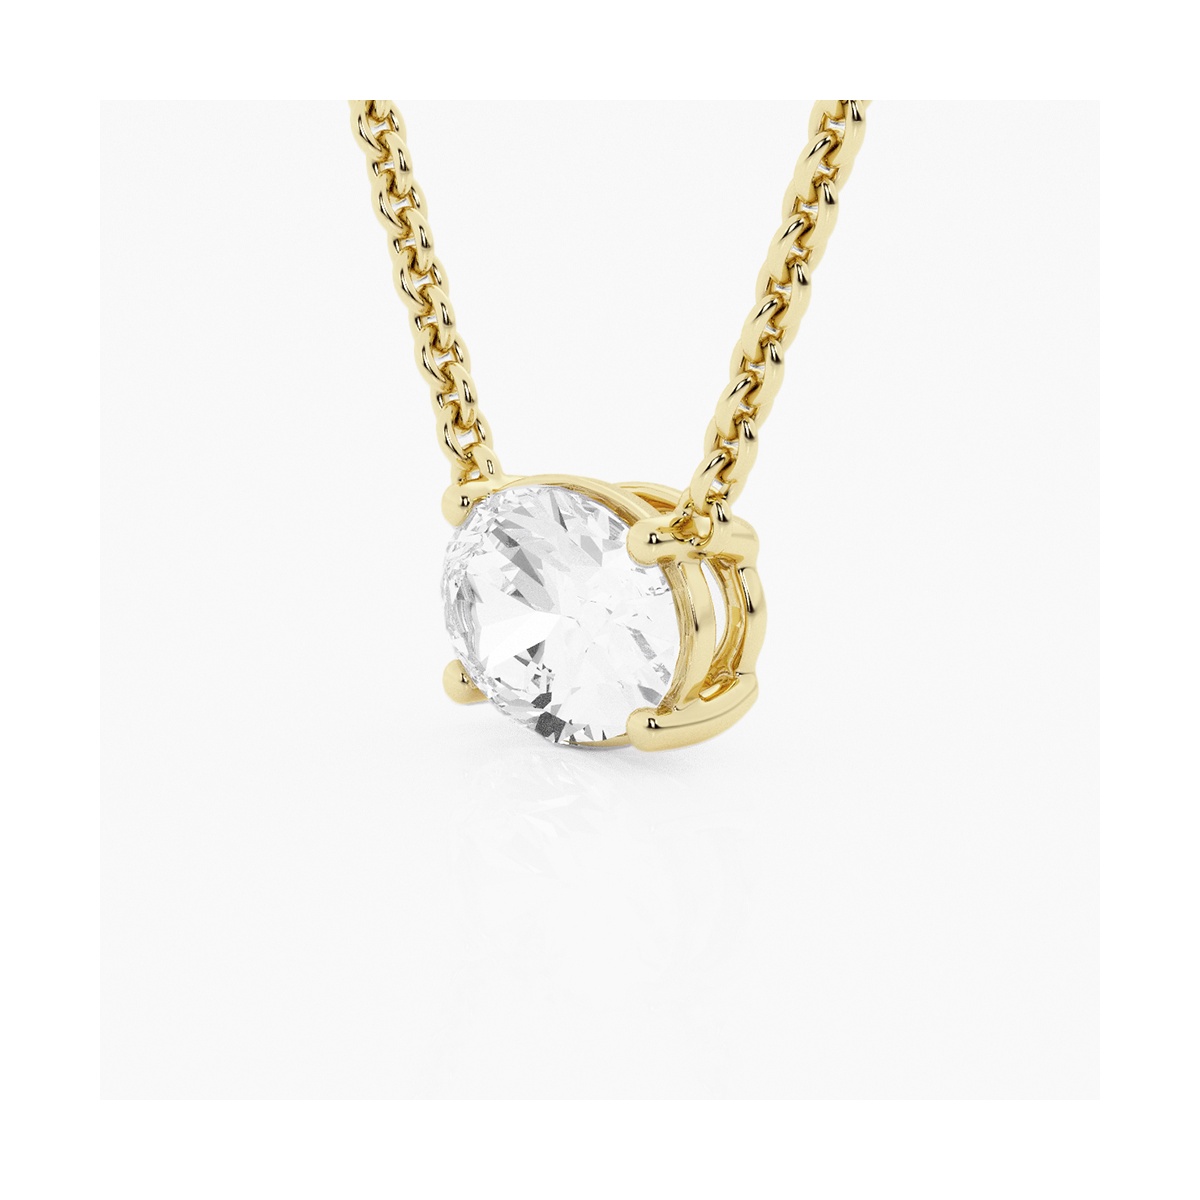 Additional Image 1 for  näas Ethereal 1 ctw Oval Lab Grown Diamond Solitaire Pendant with Adjustable Chain